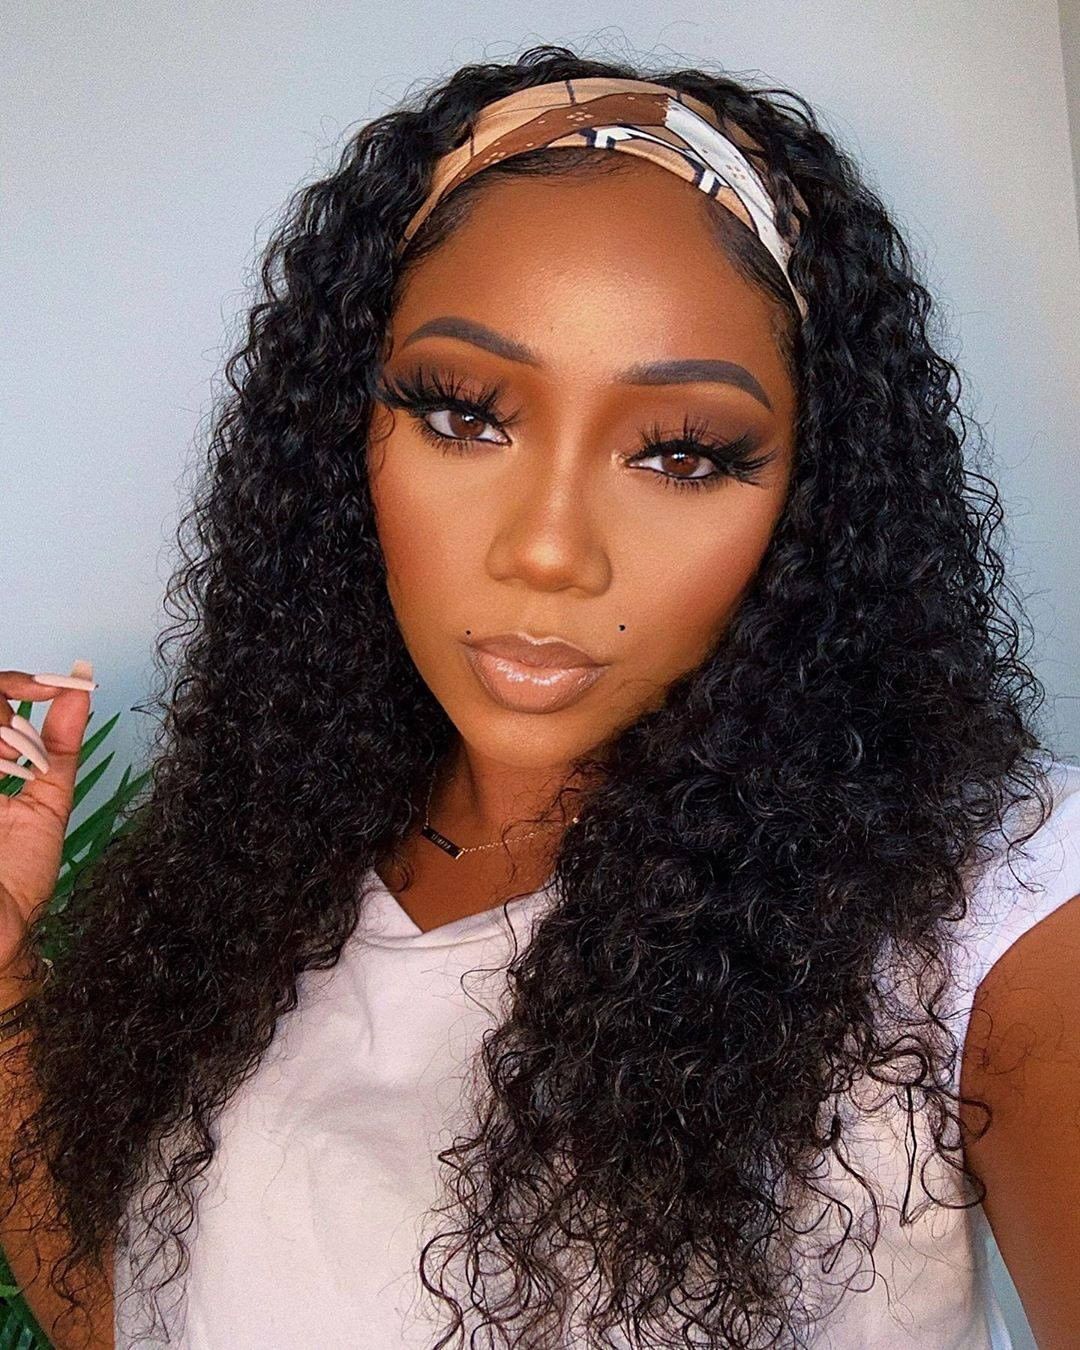 Realistic human hair wigs for African American women with Headband Wig Human Hair Curly Full Machine Made Wigs Realistic human hair wigs for African American women with Headband Wig Human Hair Curly Full Machine Made Wigs